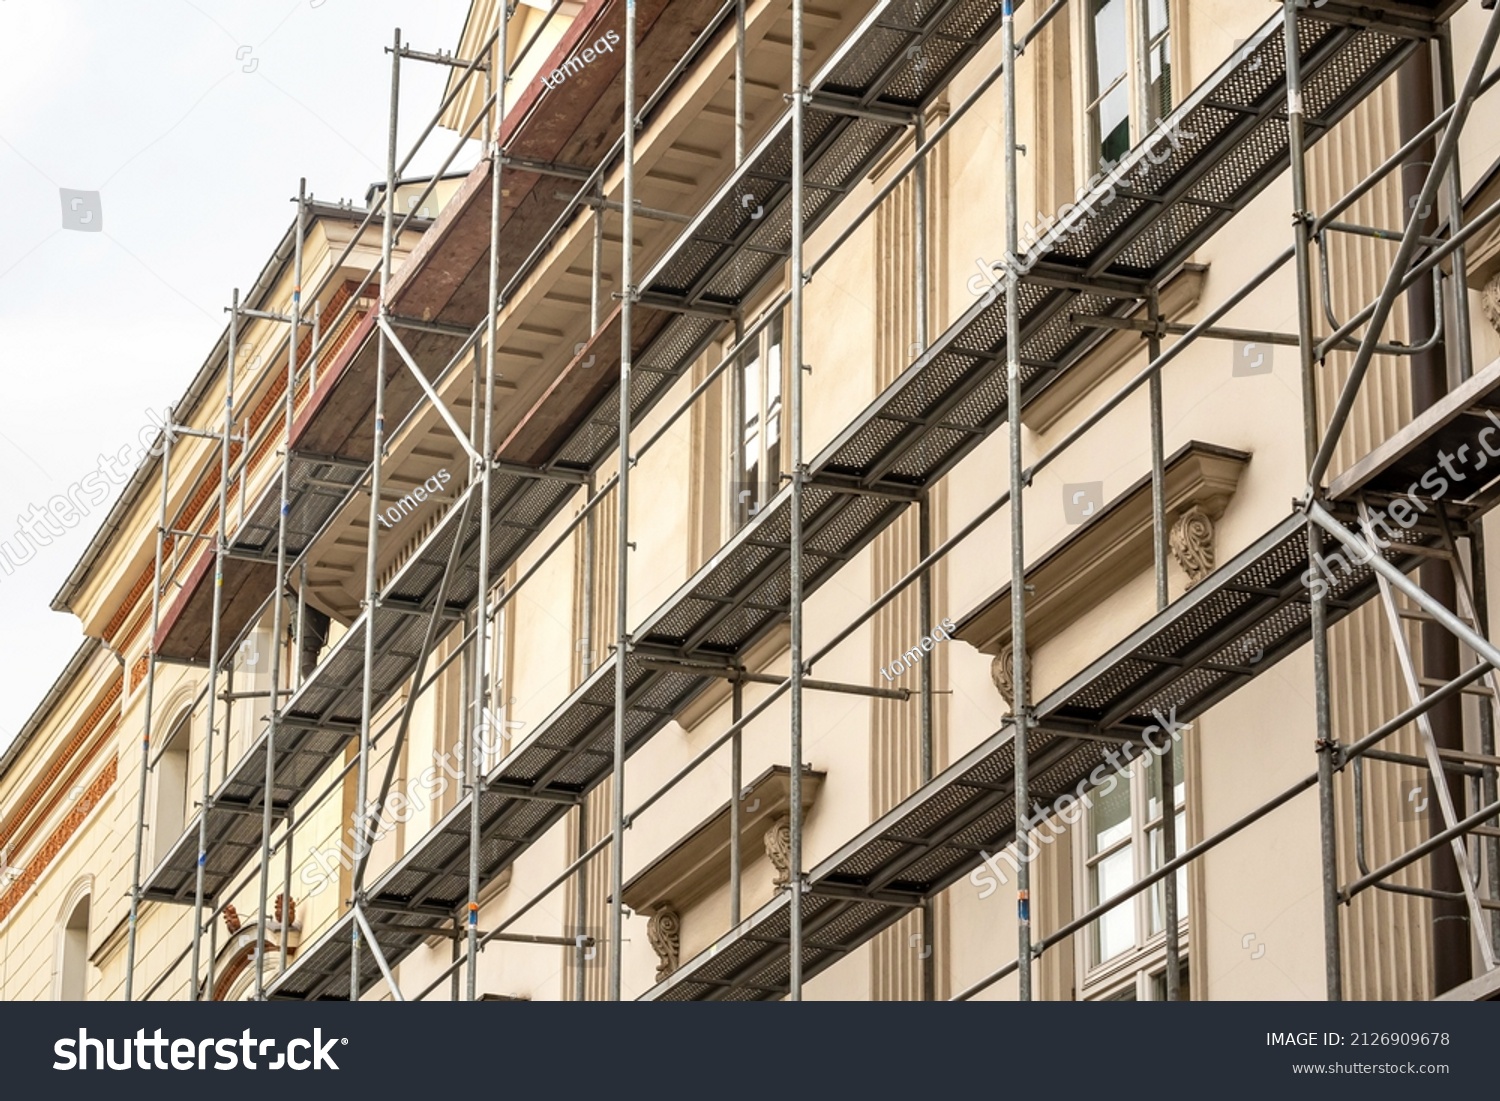 Scaffolding on a generic old tenement house, renovated historical building facade detail, closeup, nobody. Restoration industry, old architecture, real estate renovation simple concept, no people #2126909678